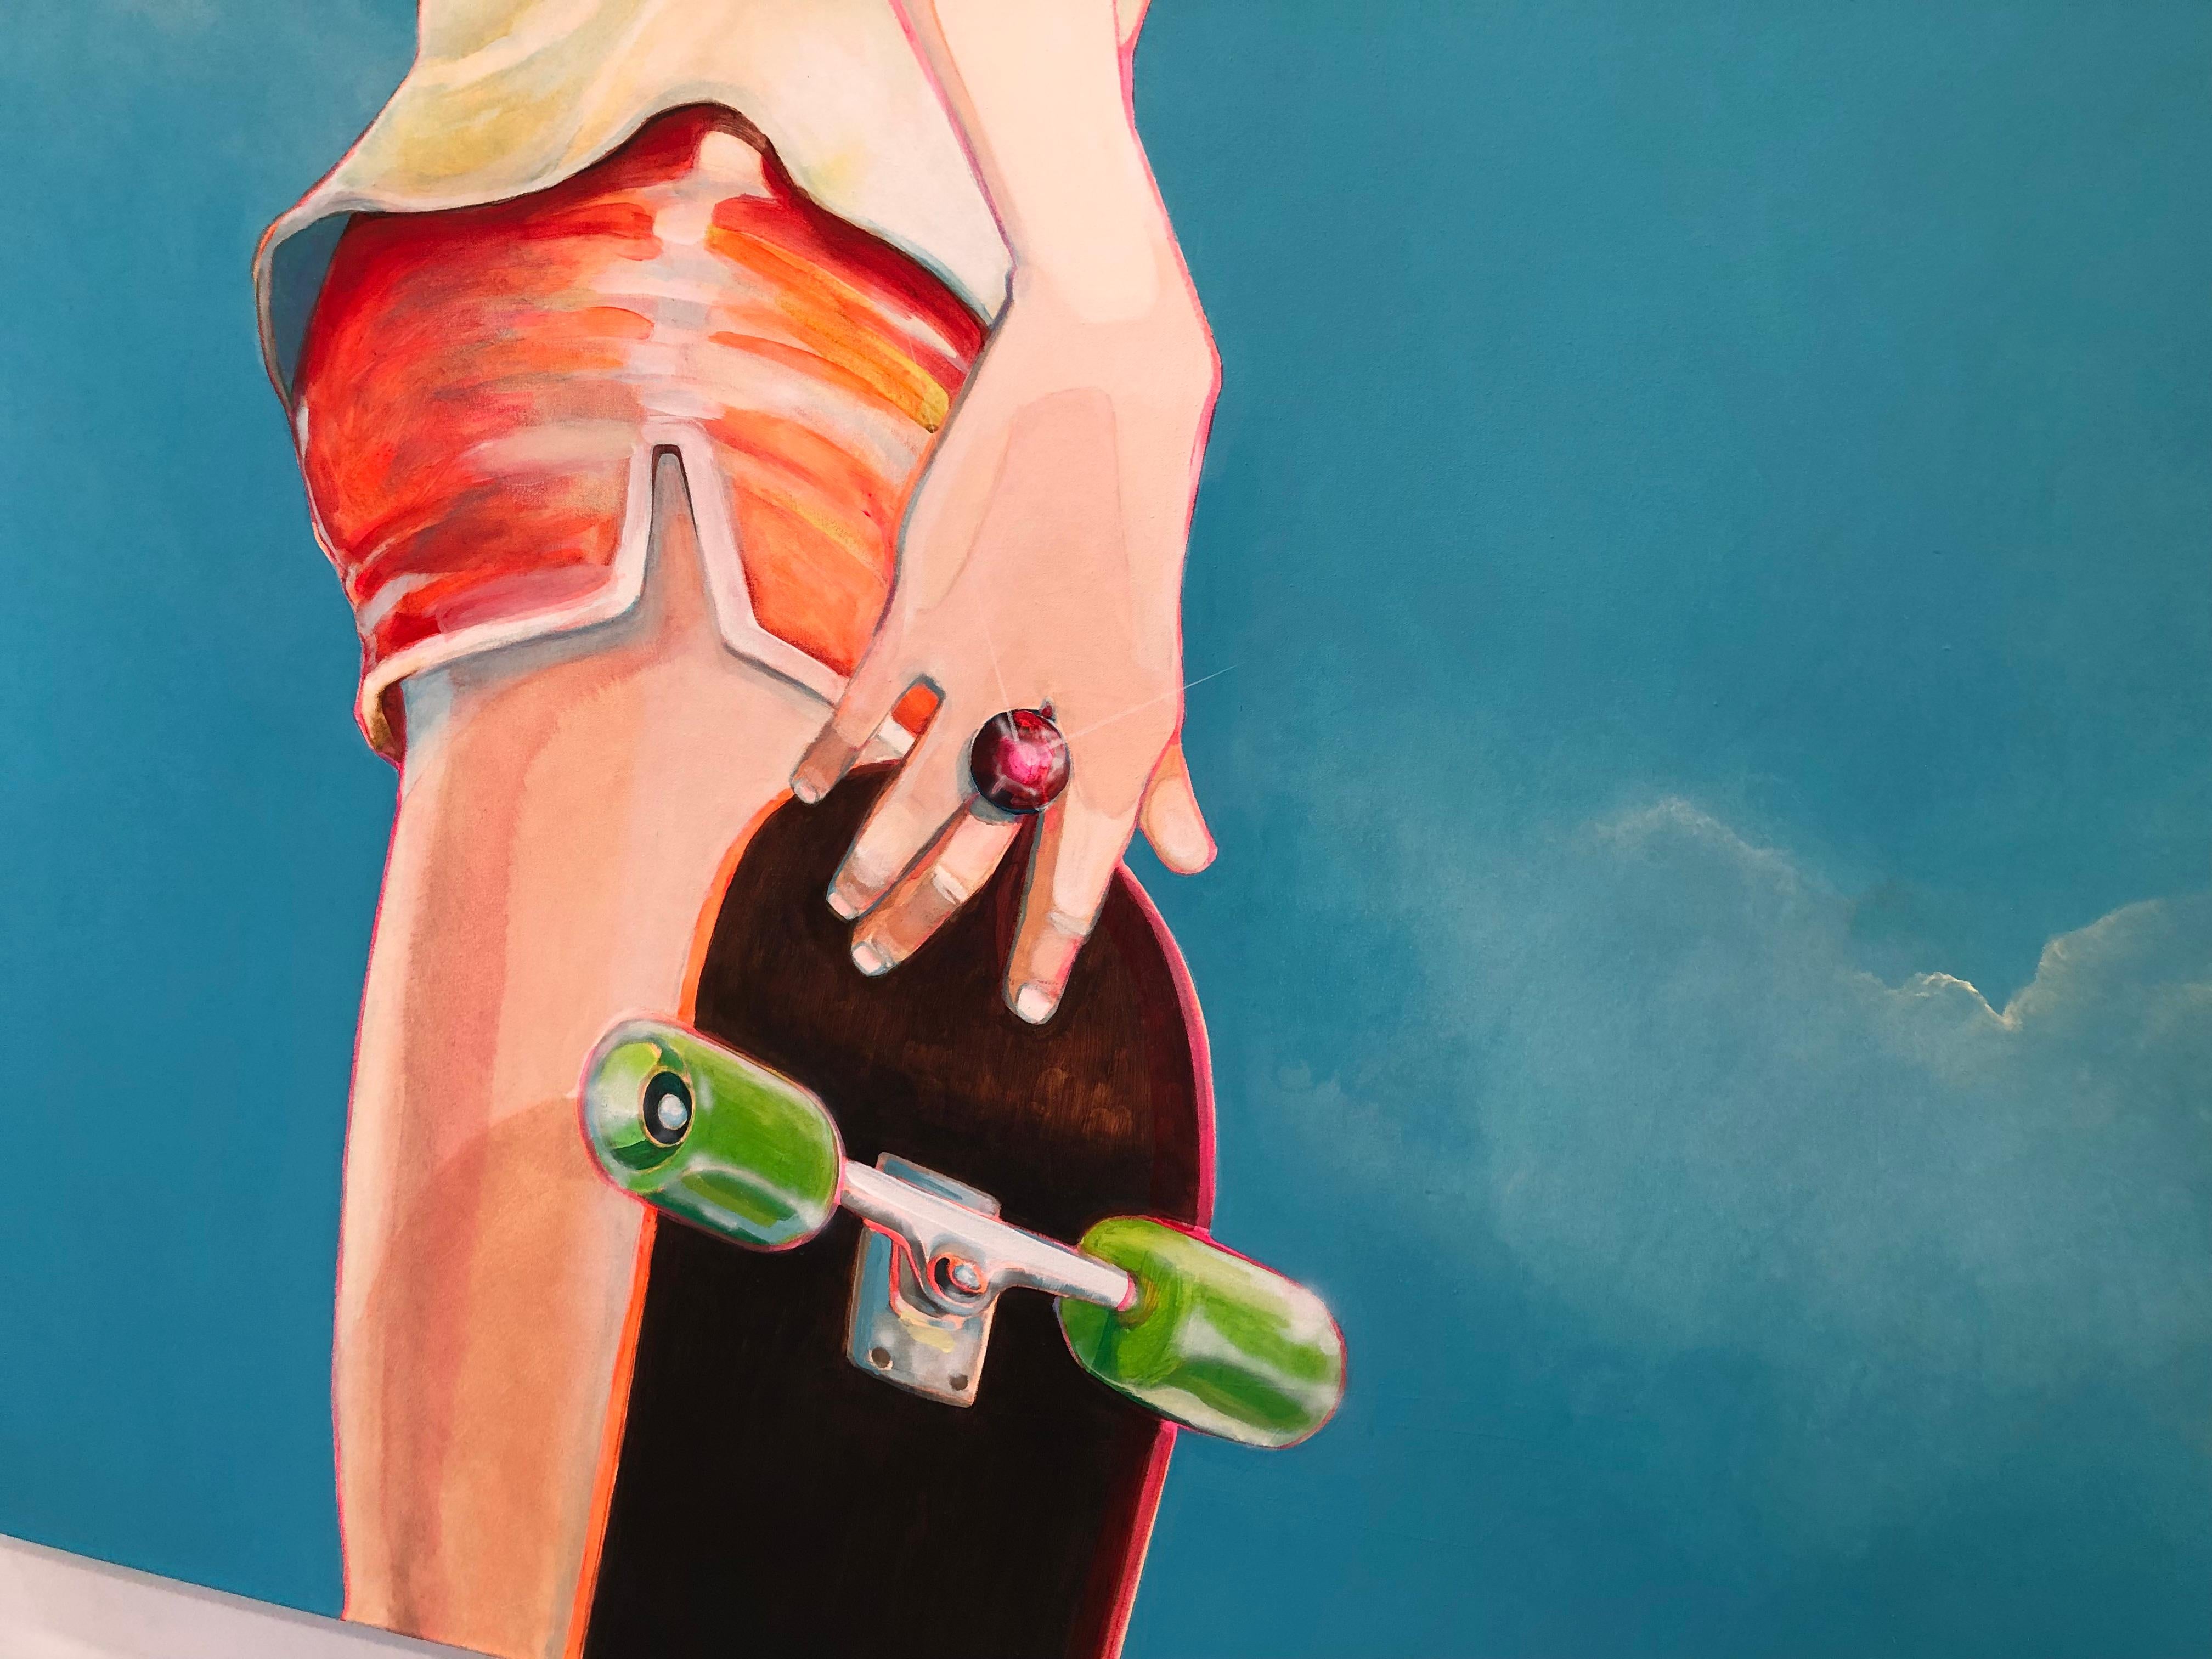 Pro Skater - Painting by Joe Currie